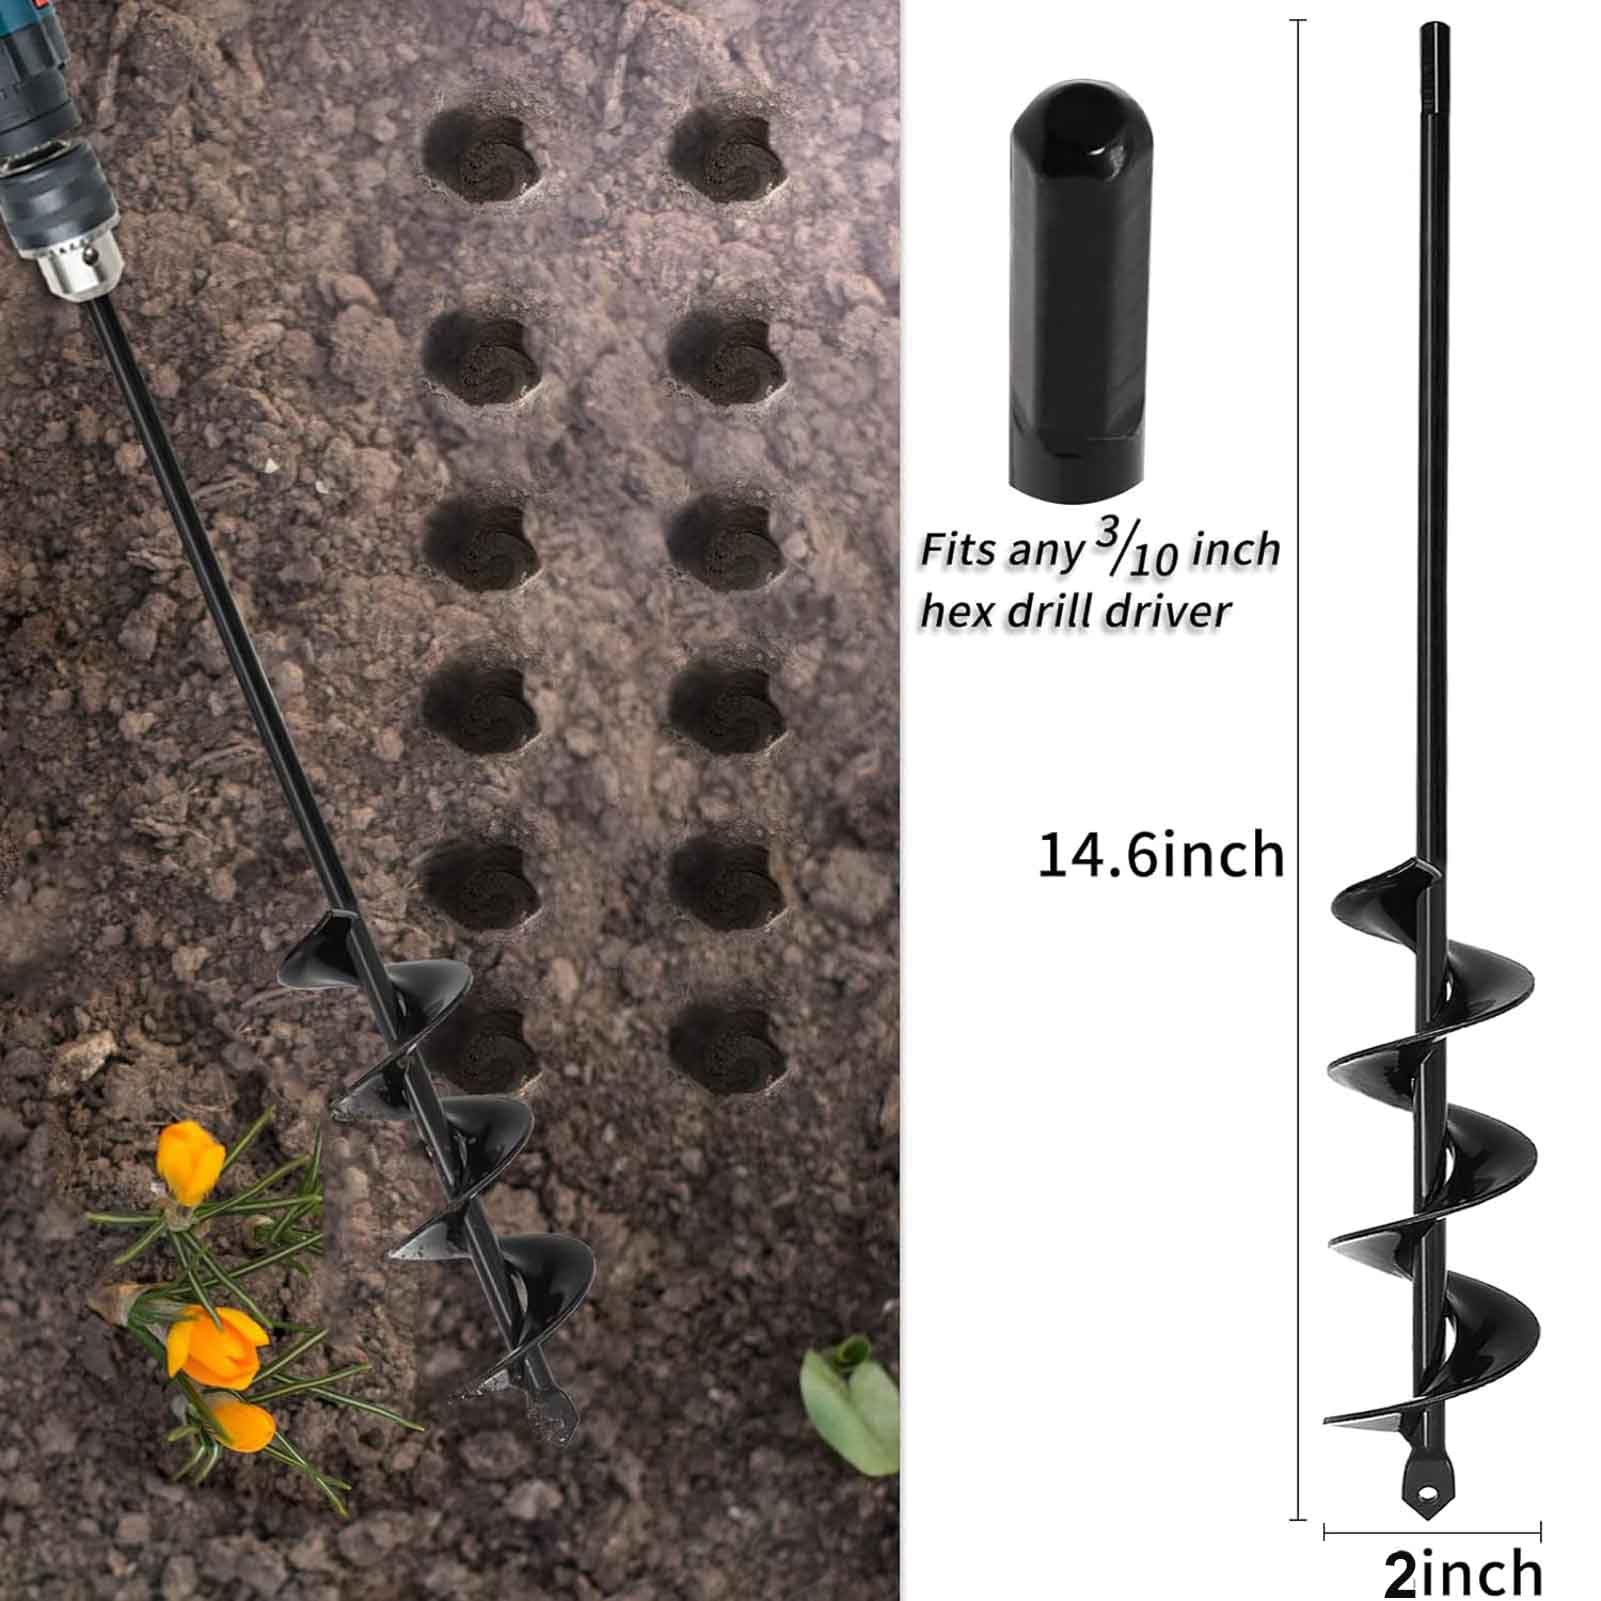 TCBWFY Auger Drill Bit 2x14.6inch Garden Plant Flower Bulb Auger Rapid Planter Bulb & Bedding Plant Auger for 3/8"Hex Drive Drill Earth Auger Drill Fence Post Umbrella Hole Digger